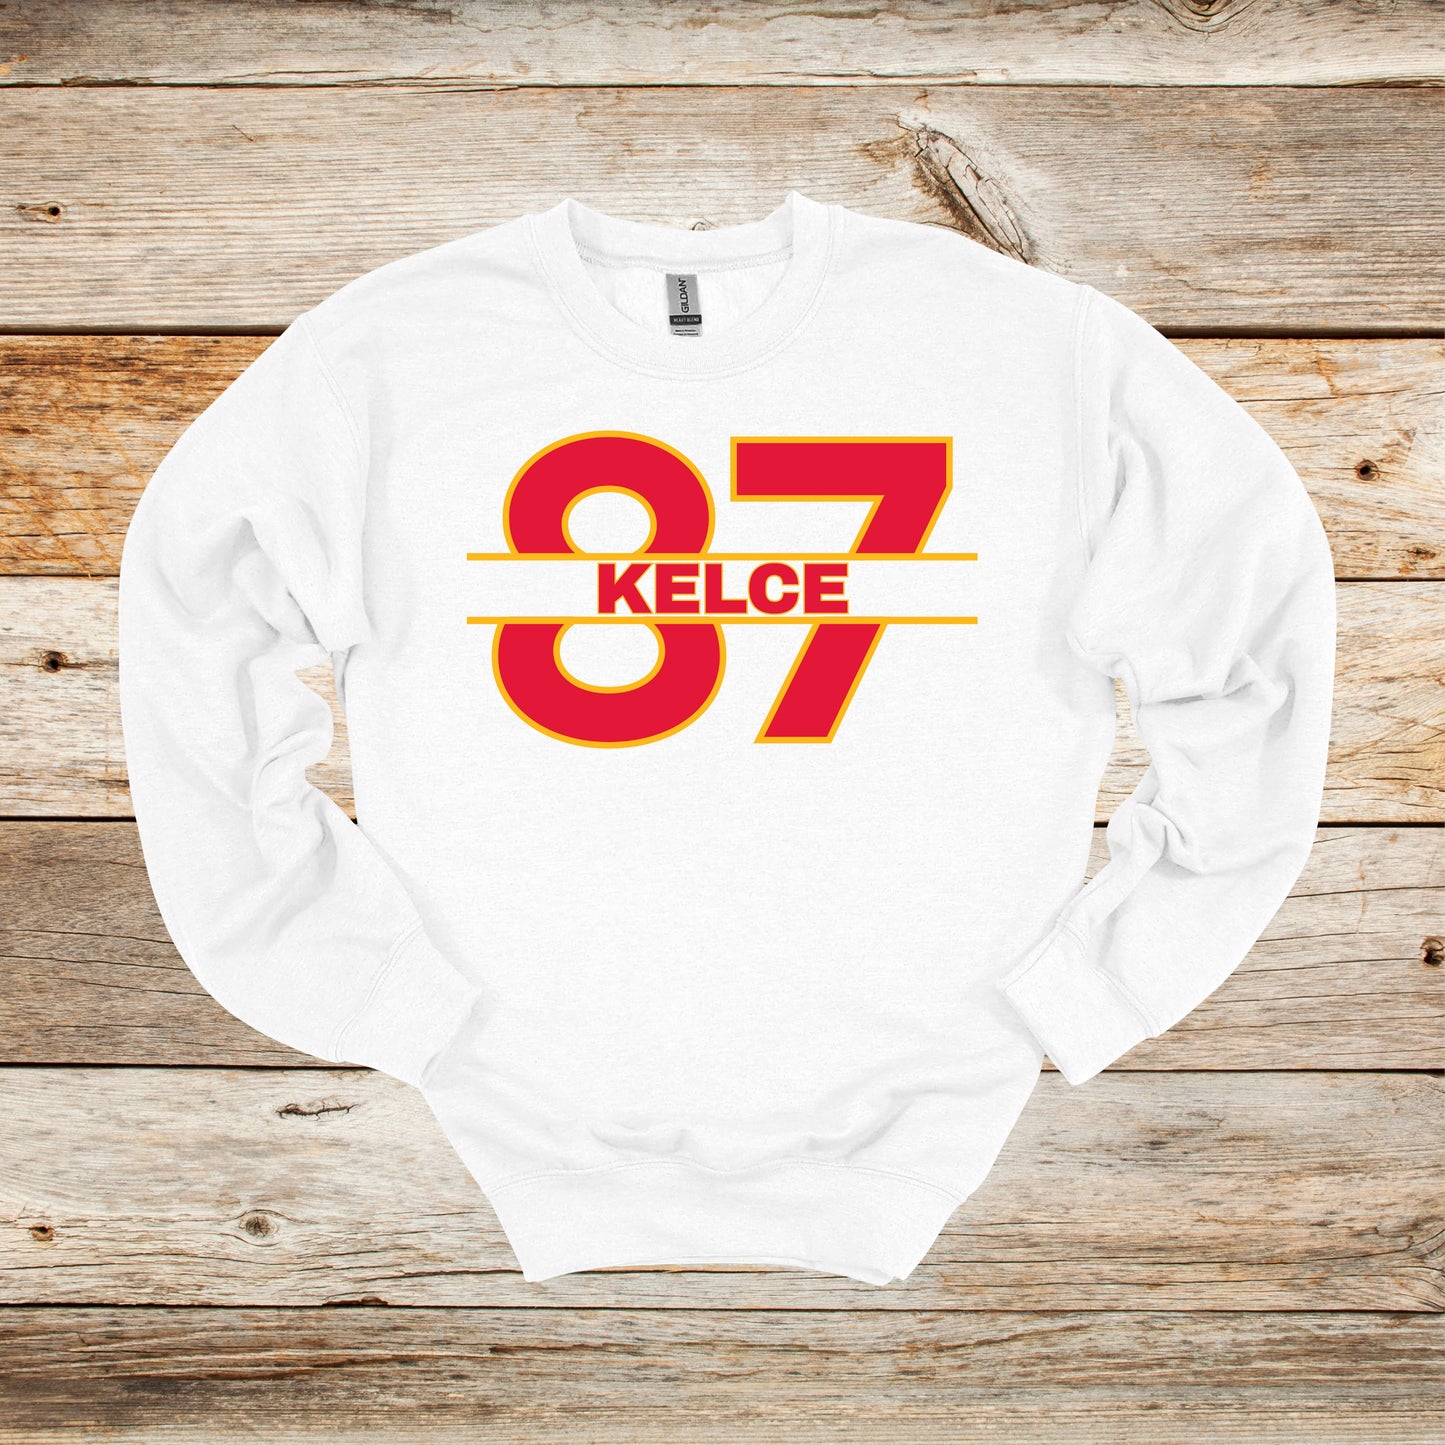 Football Crewneck and Hooded Sweatshirt - Chiefs Football - 87 Kelce - Adult and Children's Tee Shirts - Sports Hooded Sweatshirt Graphic Avenue Crewneck Sweatshirt White Adult Small